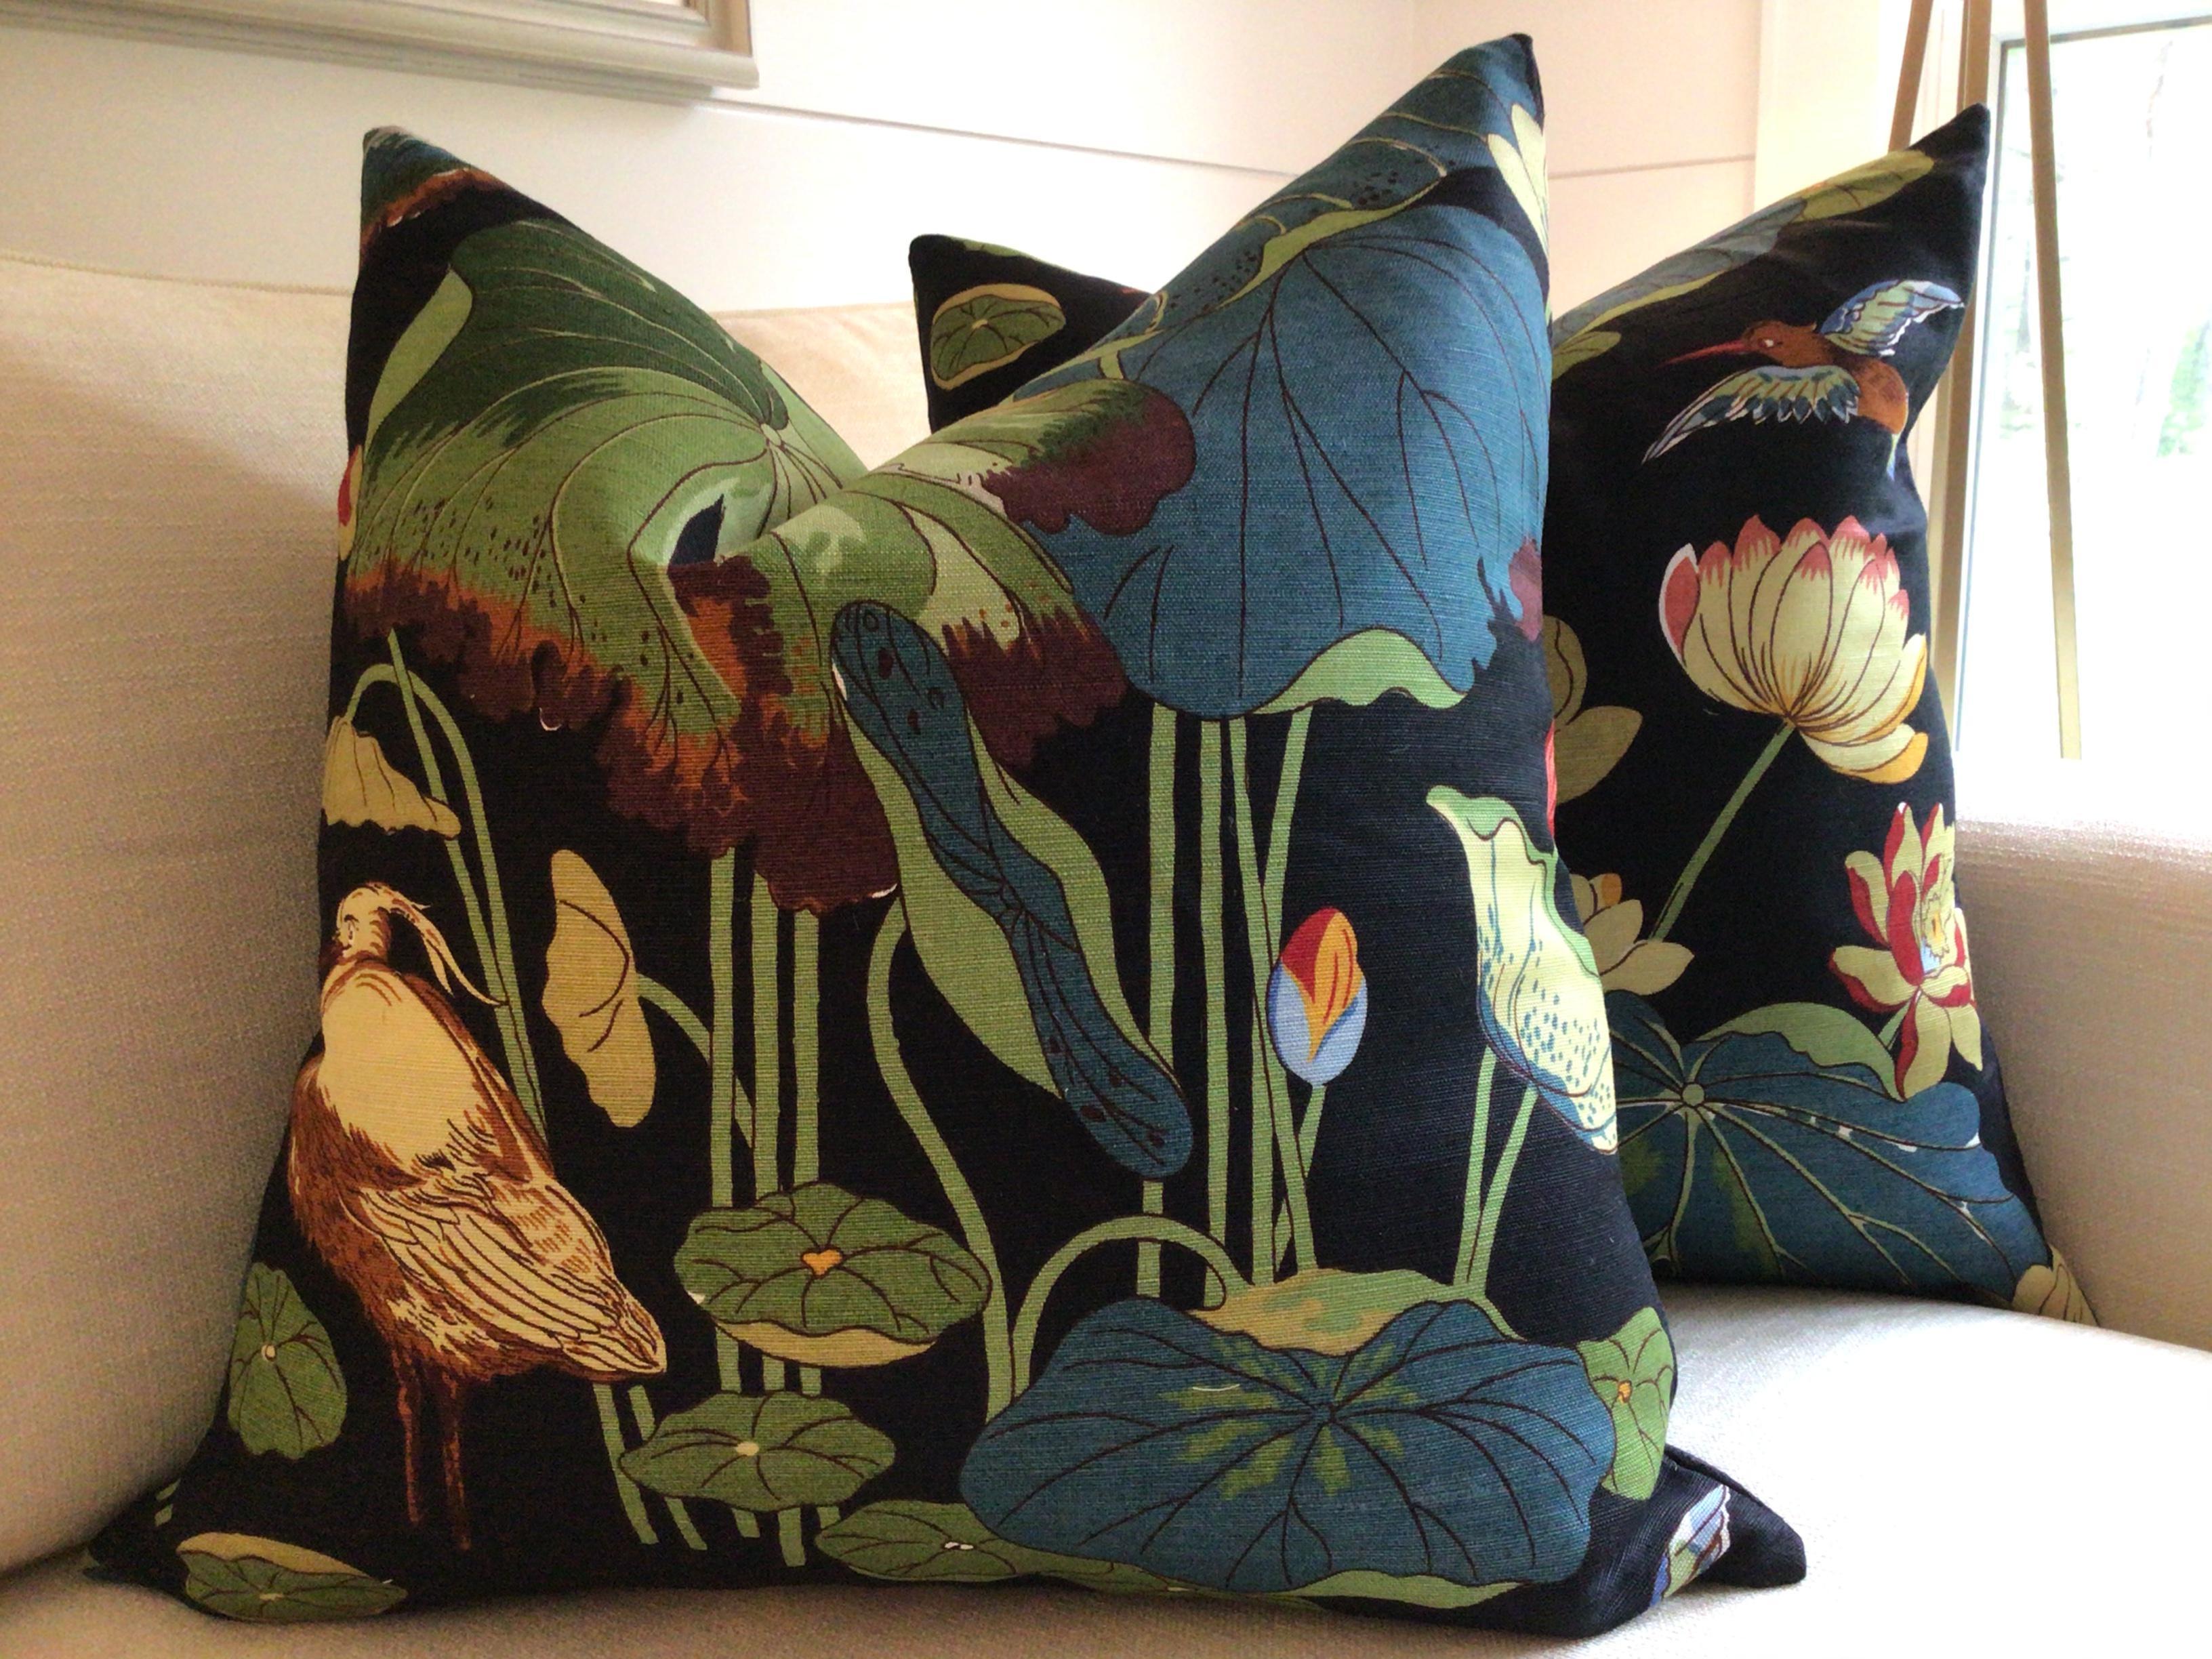 Textile Gp and J Baker “Nympheus” Down-Filled Pillows - a Pair For Sale